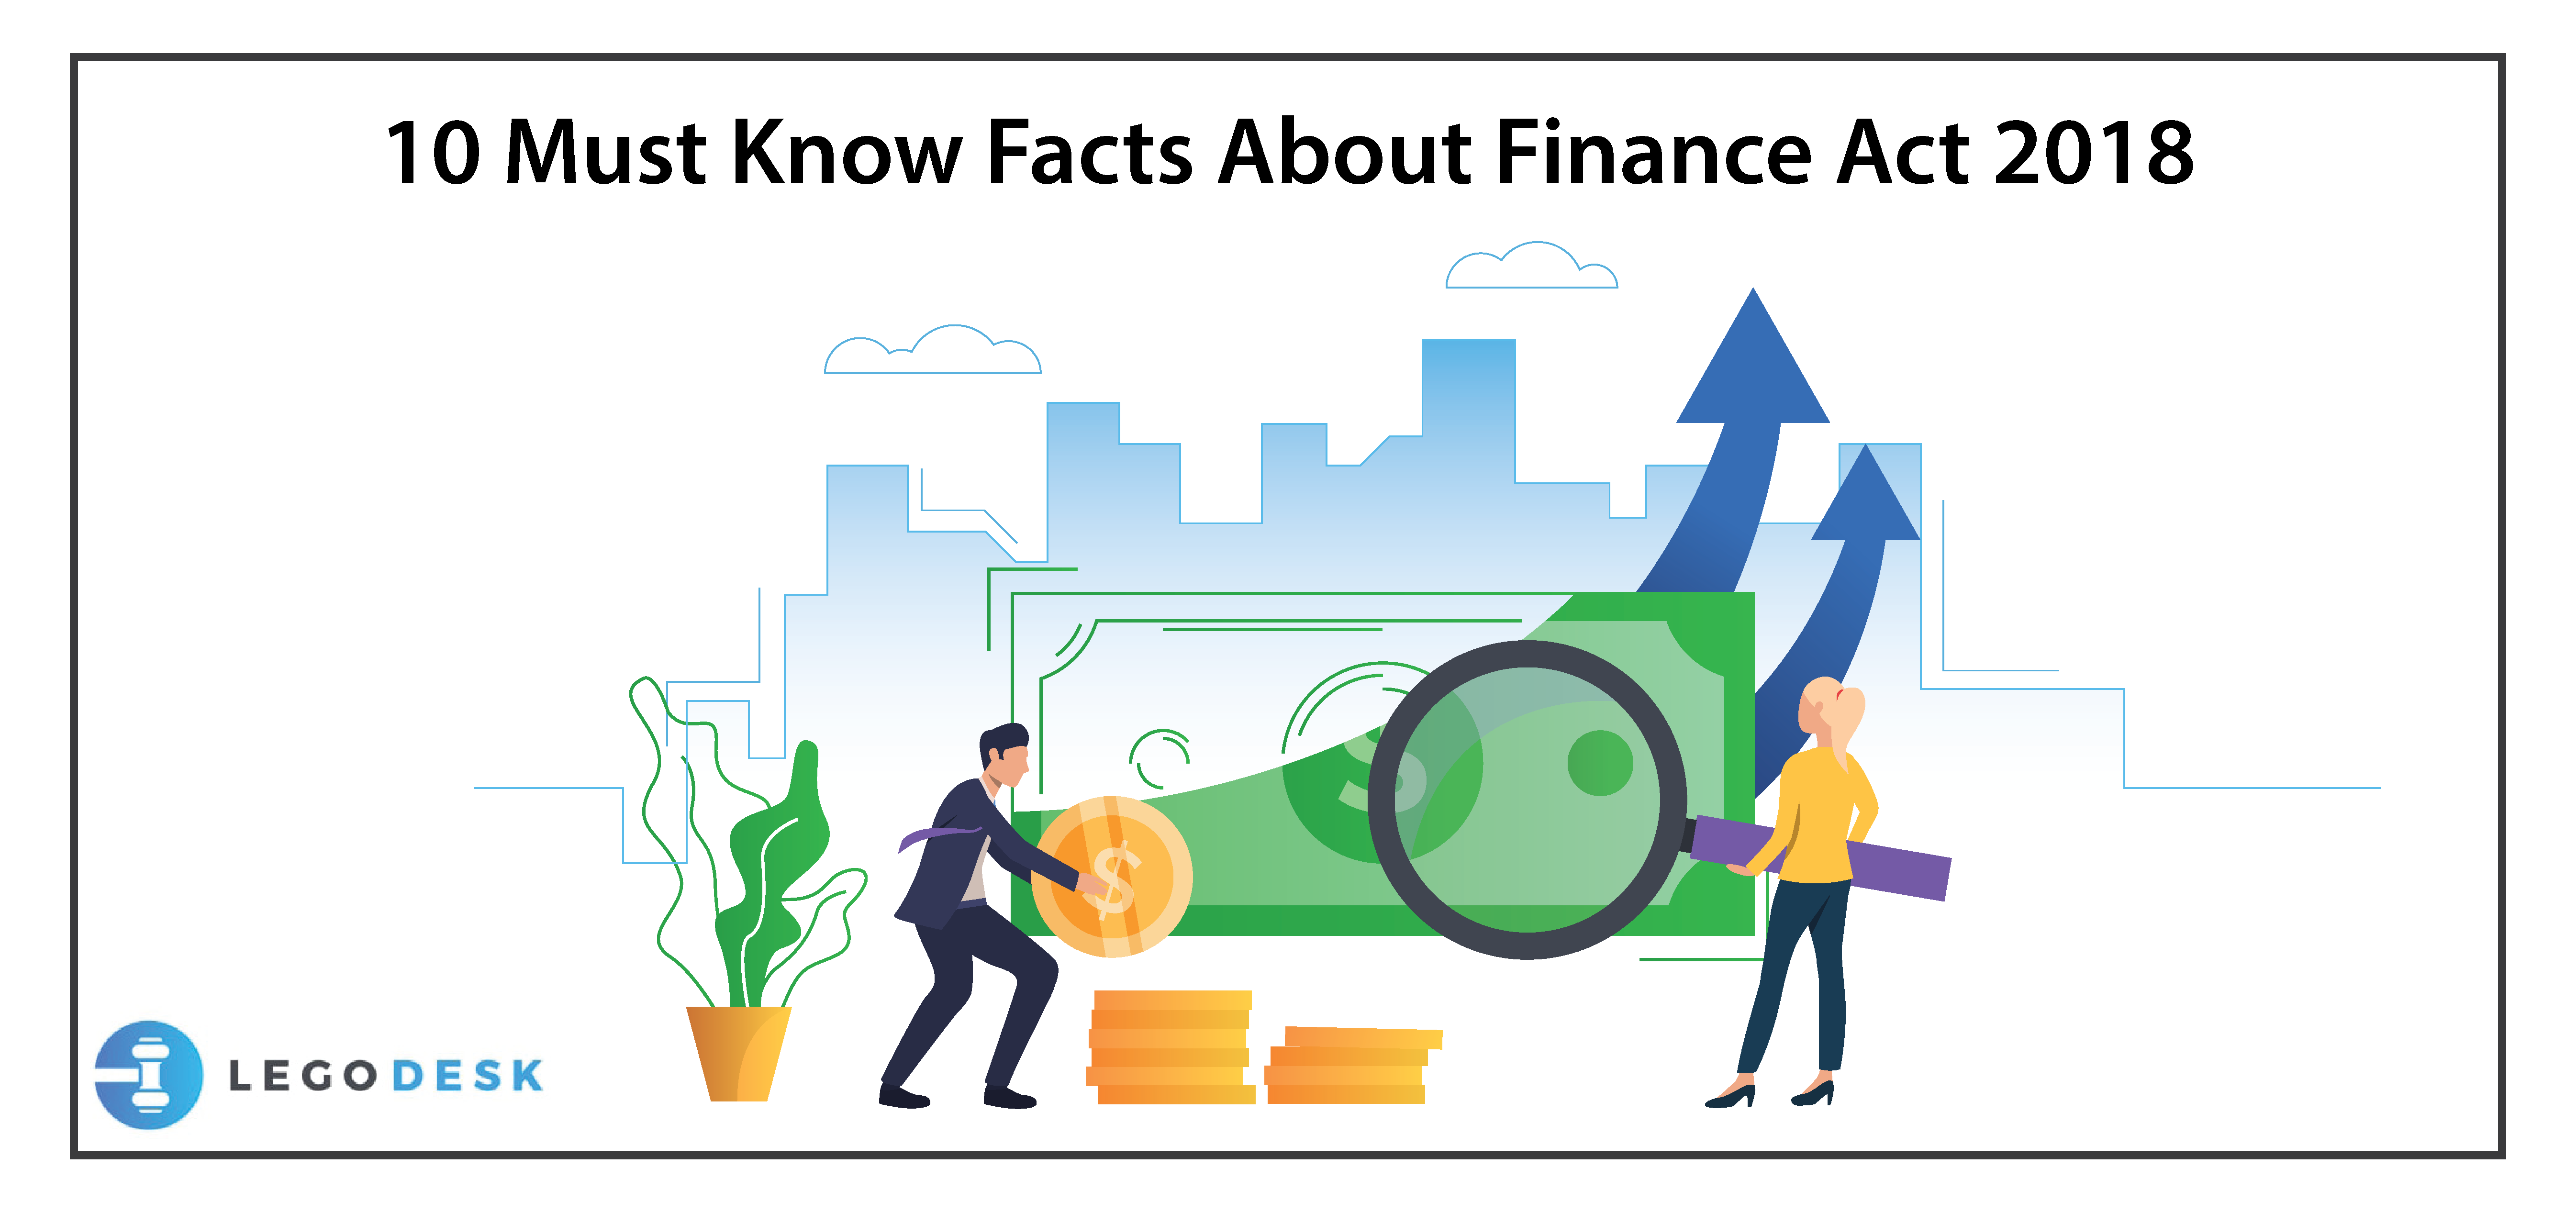 10 Must Know Facts About Finance Act 2018